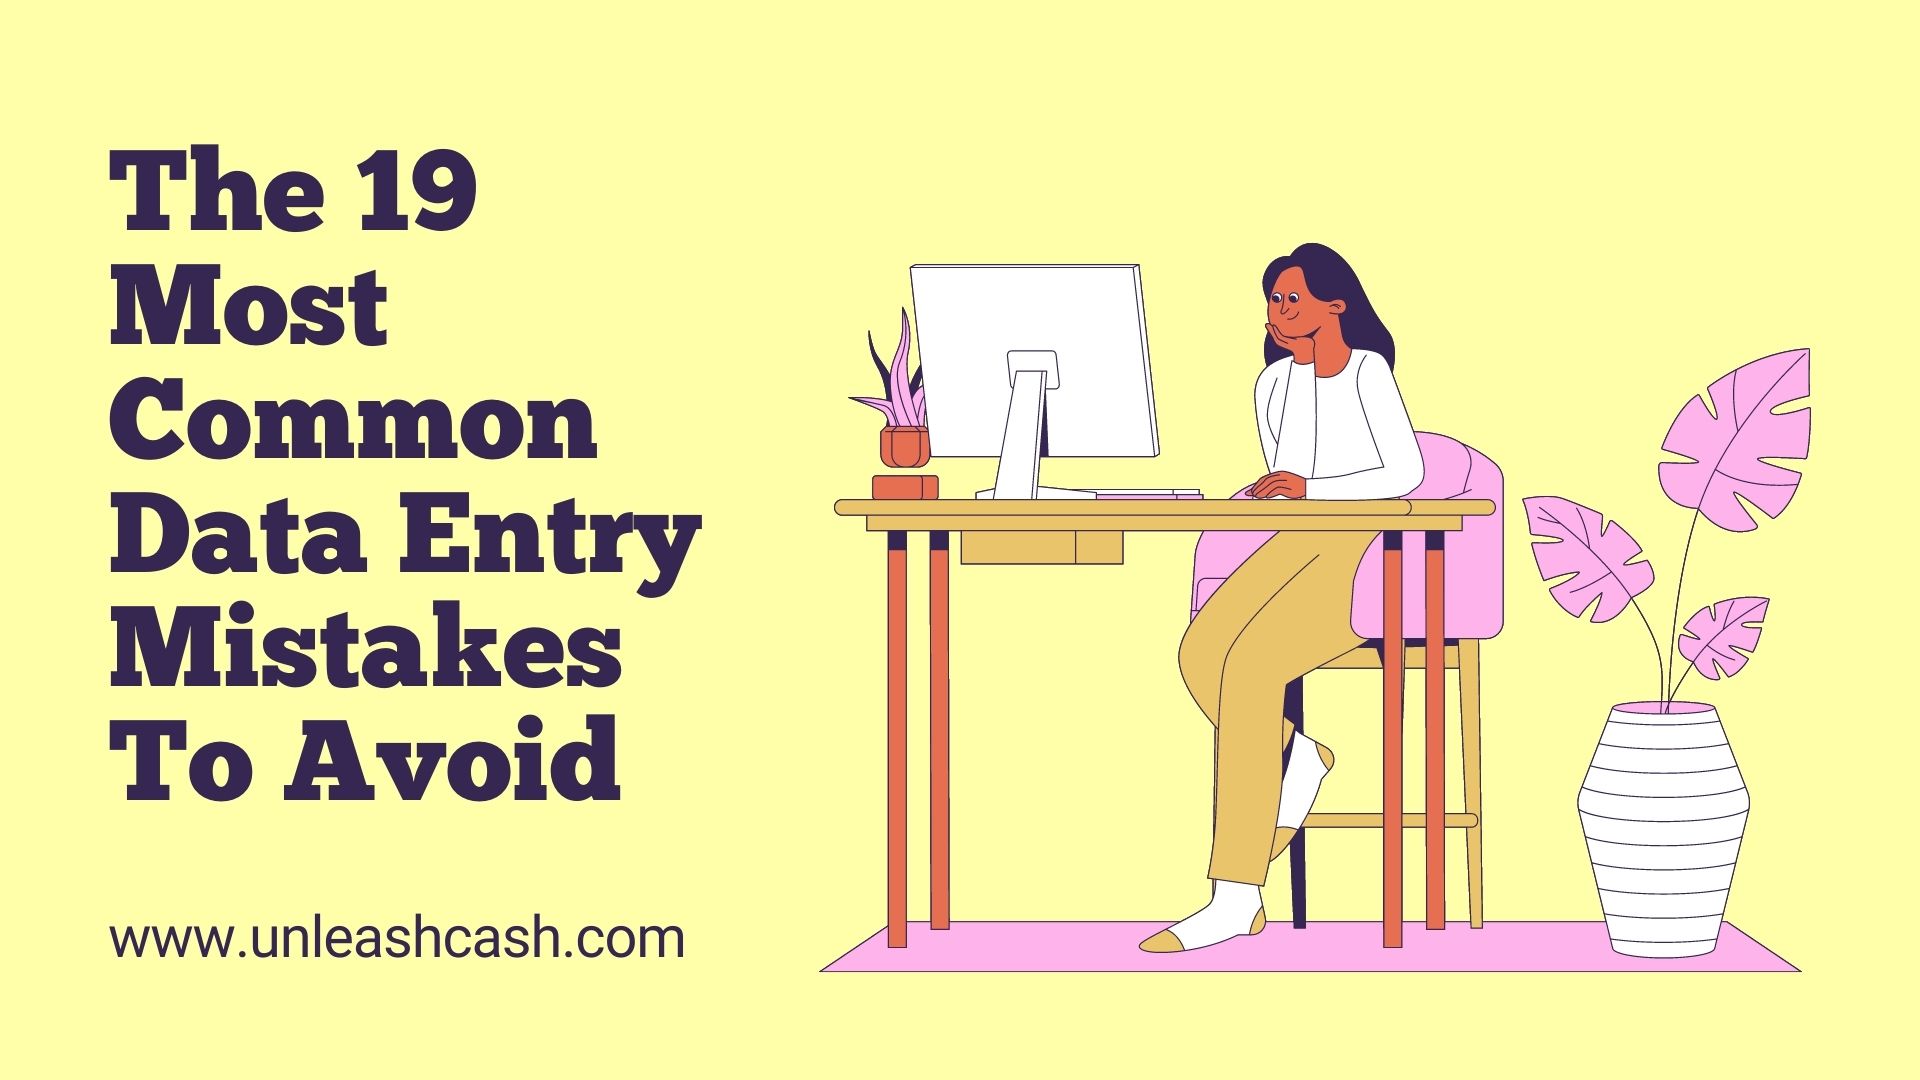 The 19 Most Common Data Entry Mistakes To Avoid